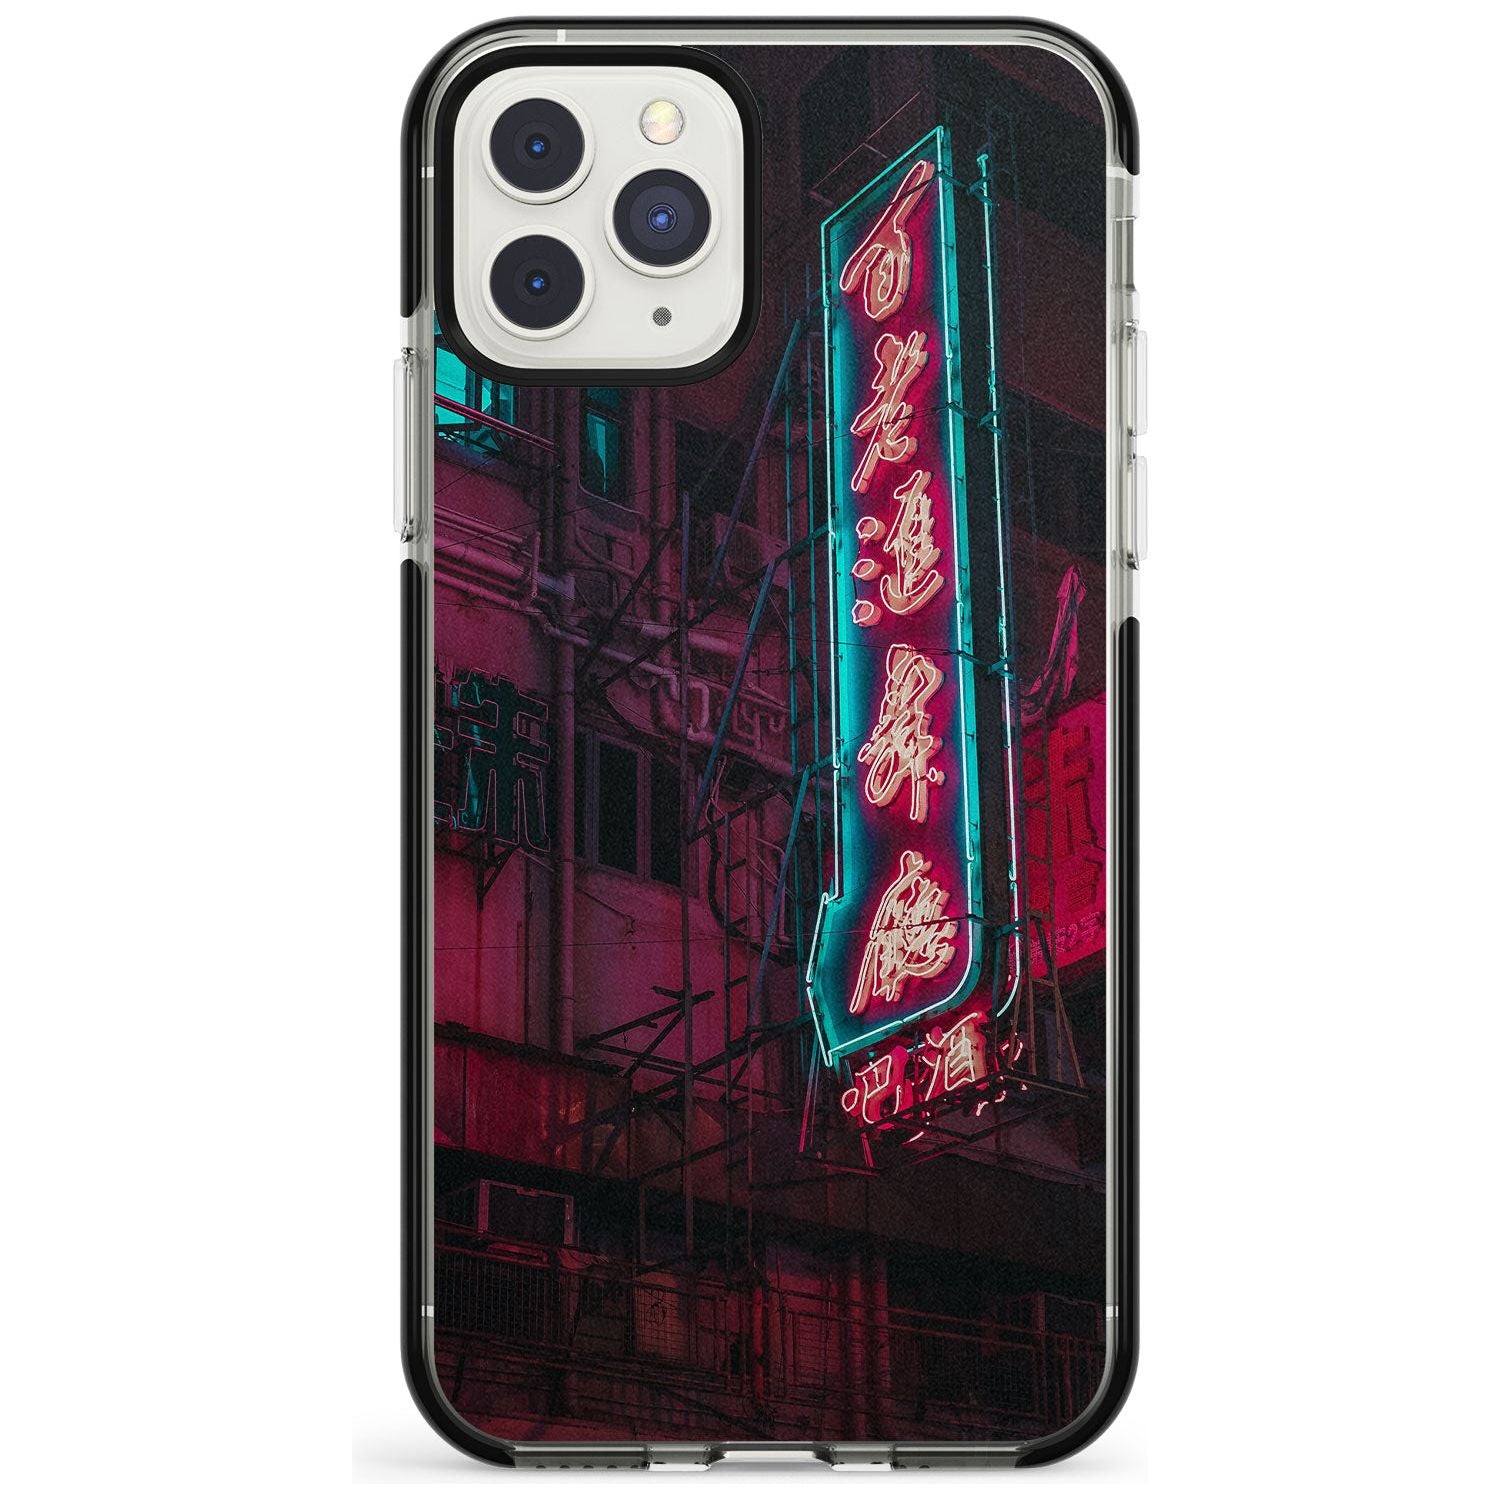 Large Kanji Sign - Neon Cities Photographs Black Impact Phone Case for iPhone 11 Pro Max